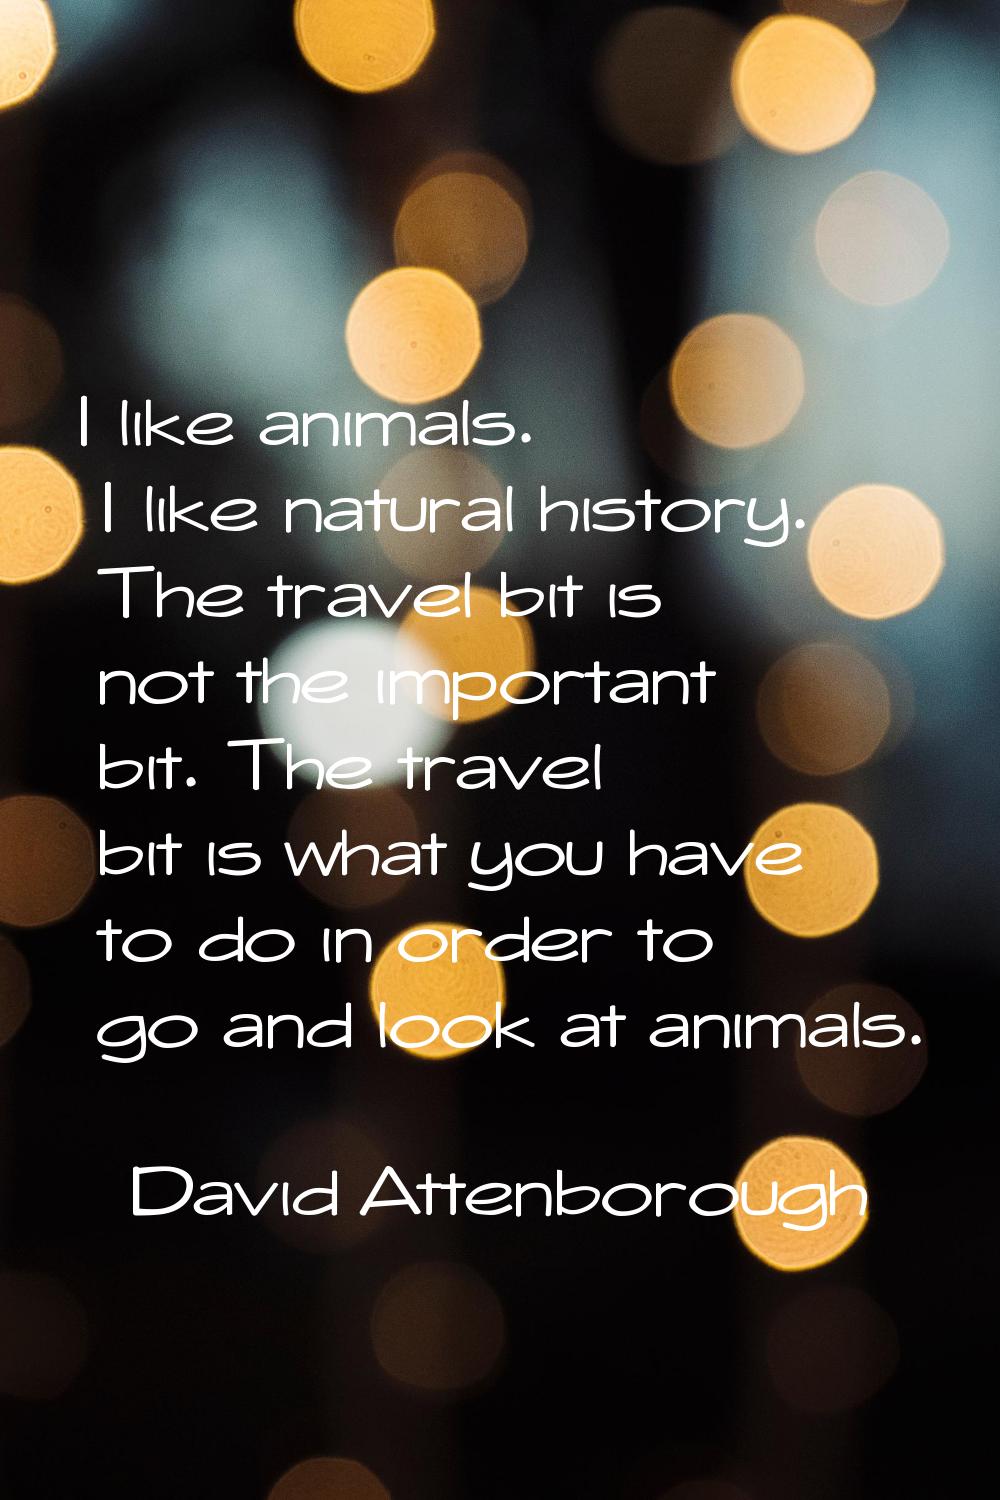 I like animals. I like natural history. The travel bit is not the important bit. The travel bit is 